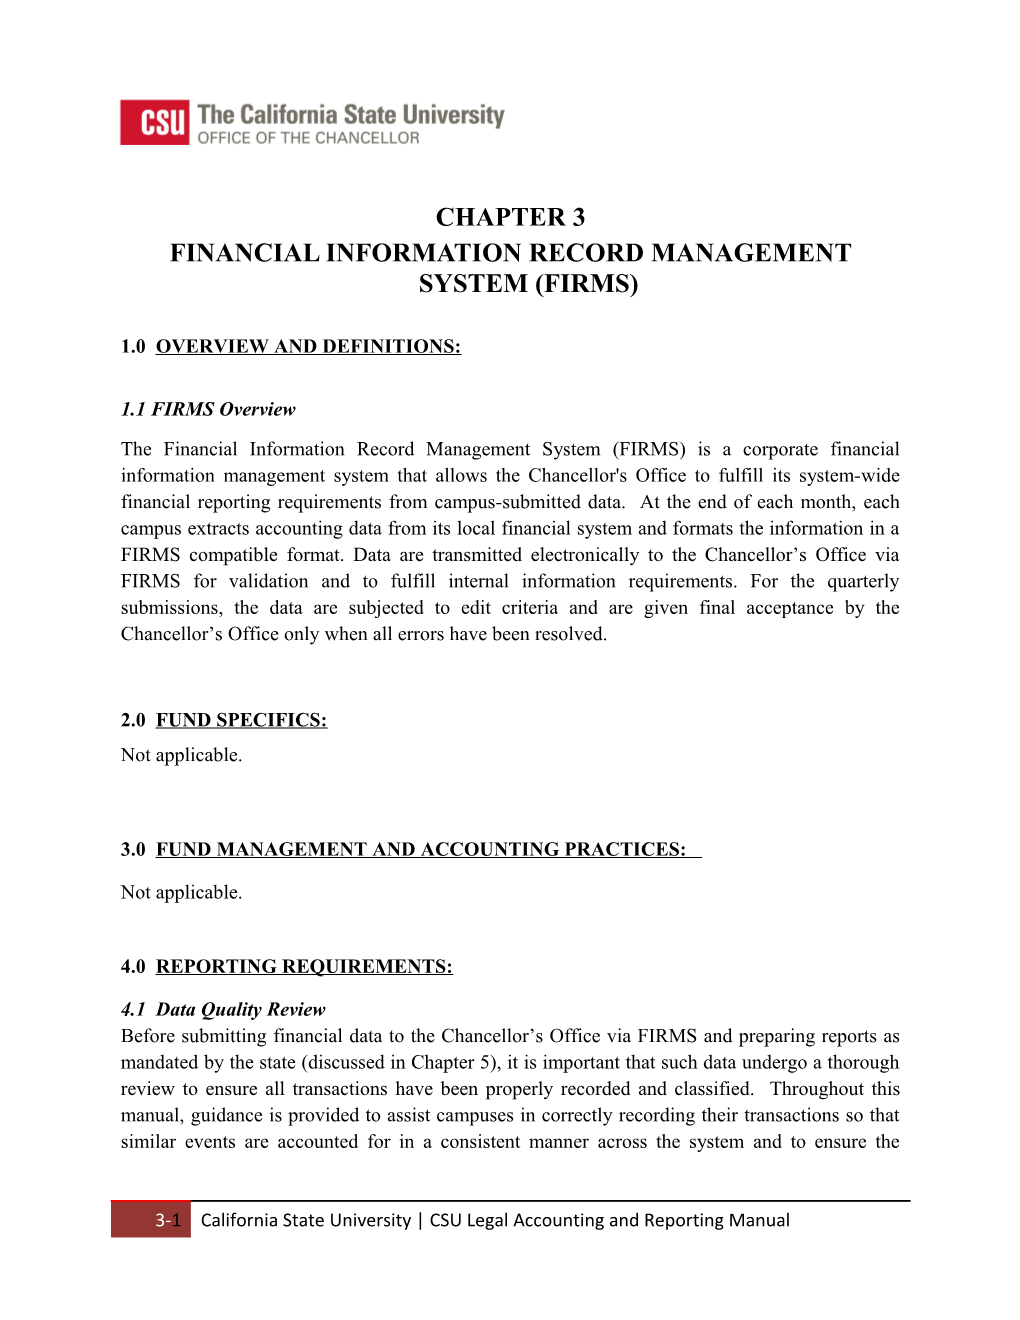 Financial Information Record Management System (Firms)